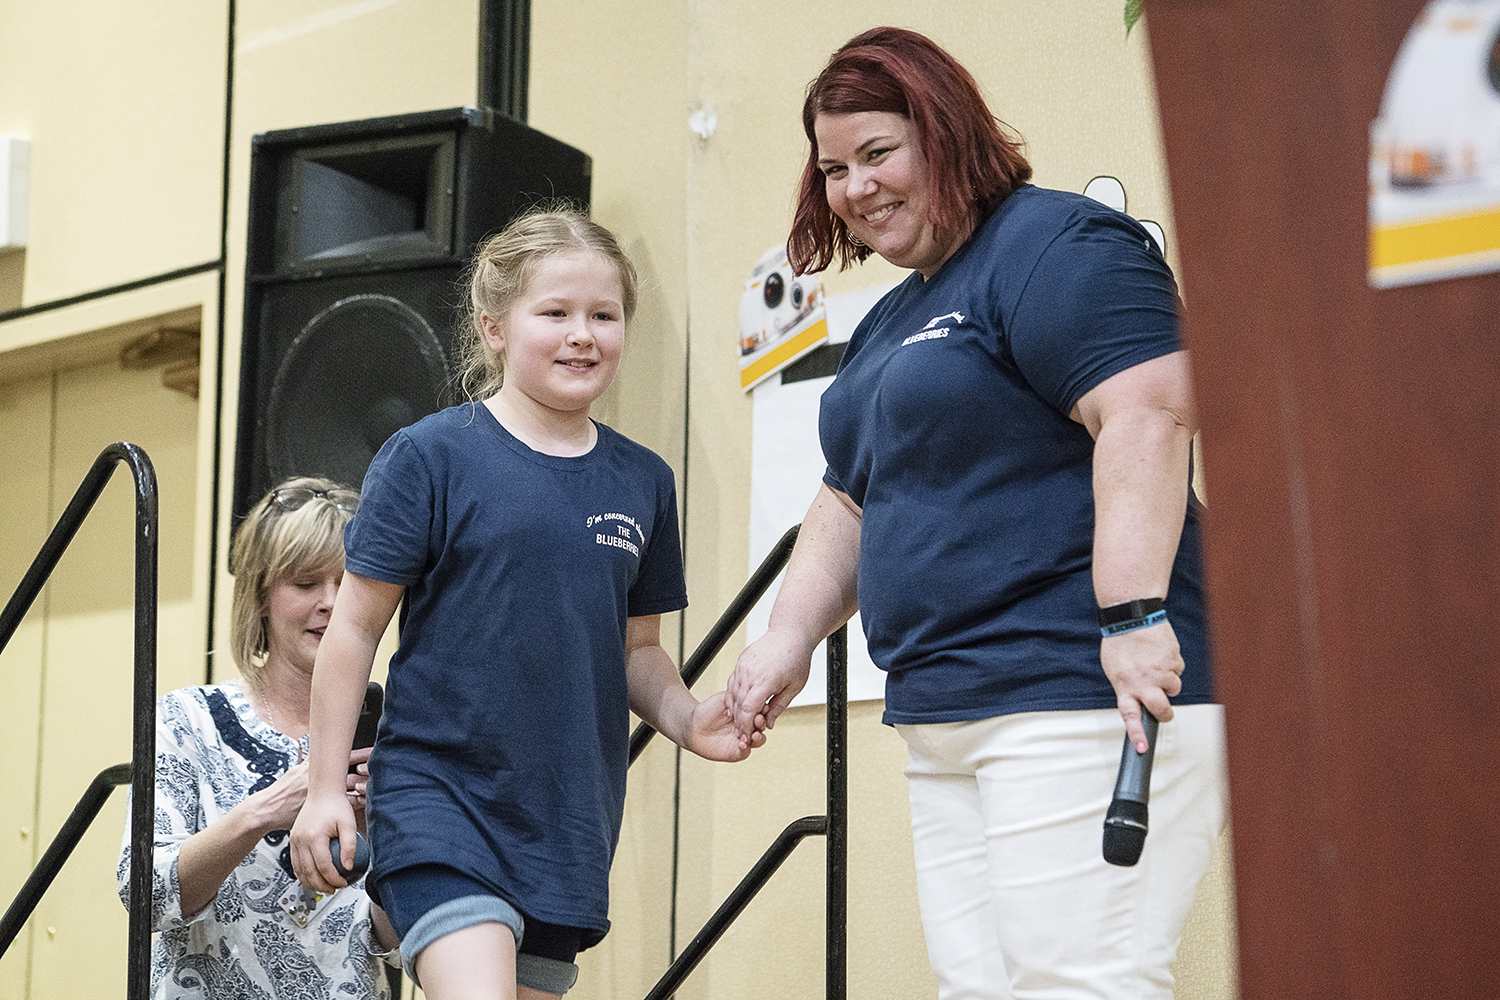 Flint, MI - Friday, May 4, 2018: FlintSide publisher Marjory Raymer (right), 44, from Flint, holds the hand of Davison Central Elementary School student Brooke Laine as she makes her way up the steps to the stage during the 5th Annual Blueberry Ambas